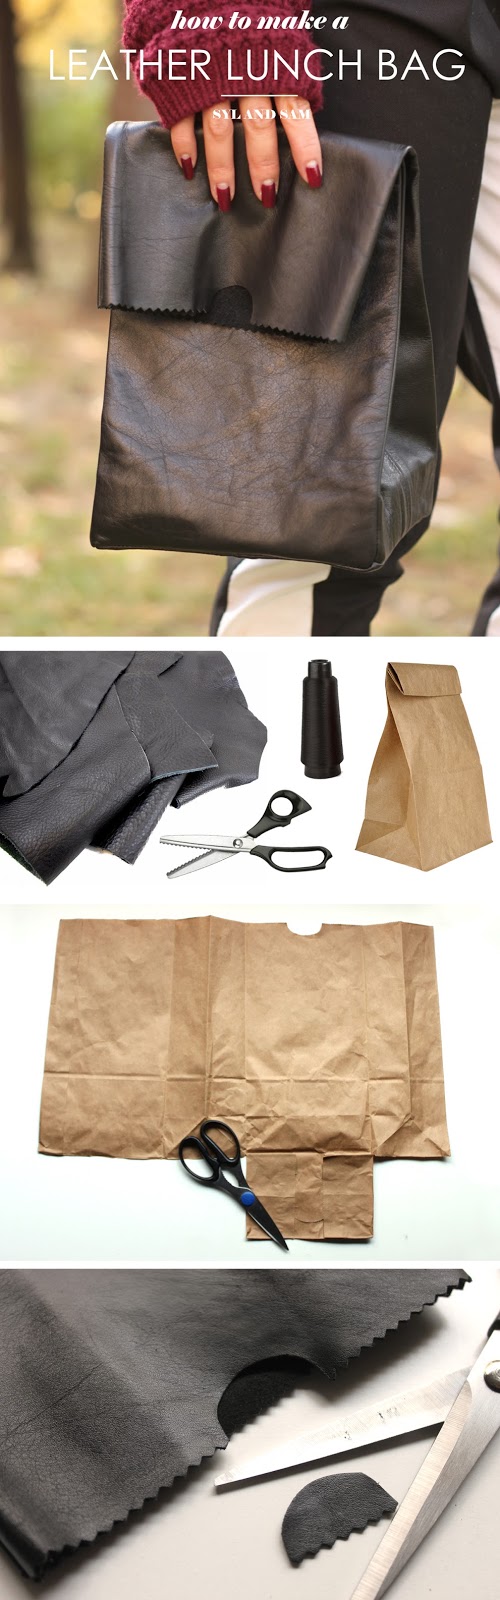 Learn how to make your own leather lunch bag. Inspired by designer fold over bag by Jil Sander.